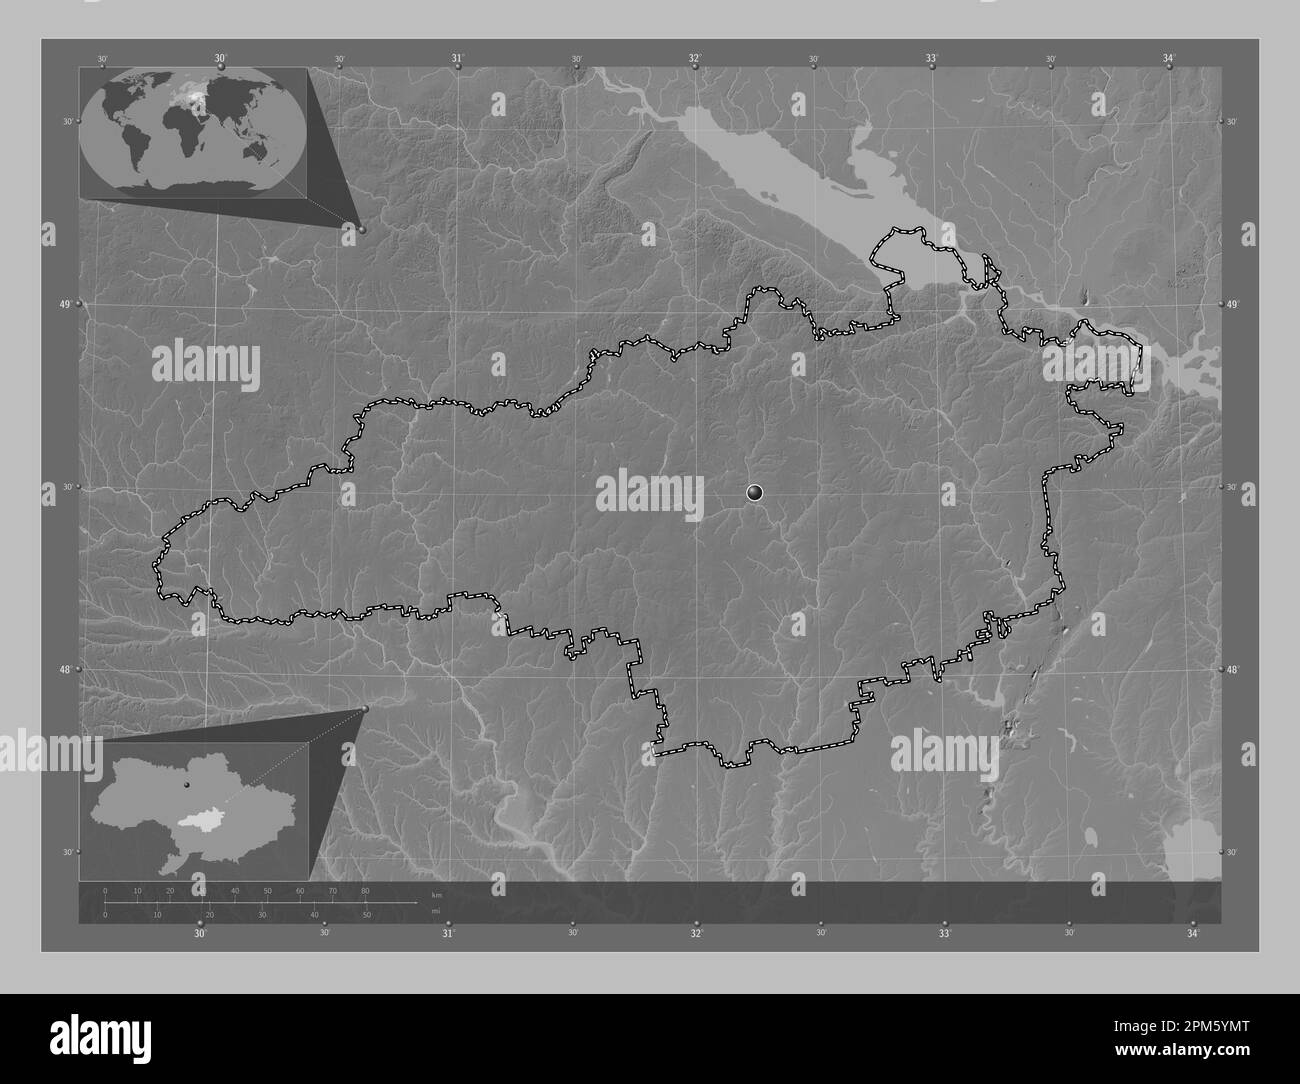 Kirovohrad, region of Ukraine. Grayscale elevation map with lakes and rivers. Corner auxiliary location maps Stock Photo